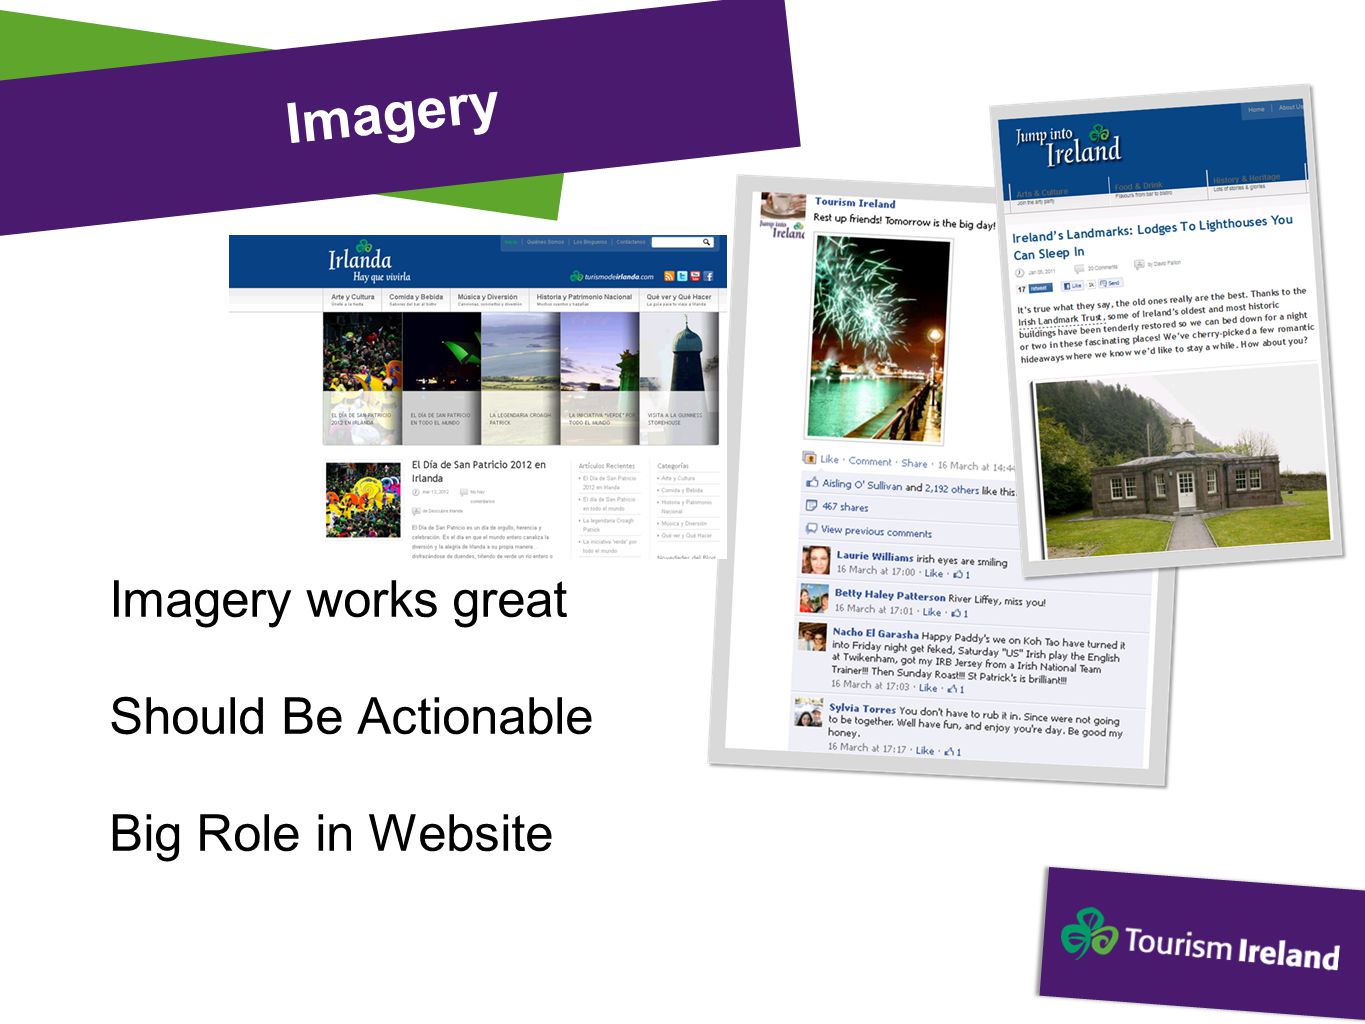 Imagery Imagery works great Should Be Actionable Big Role in Website